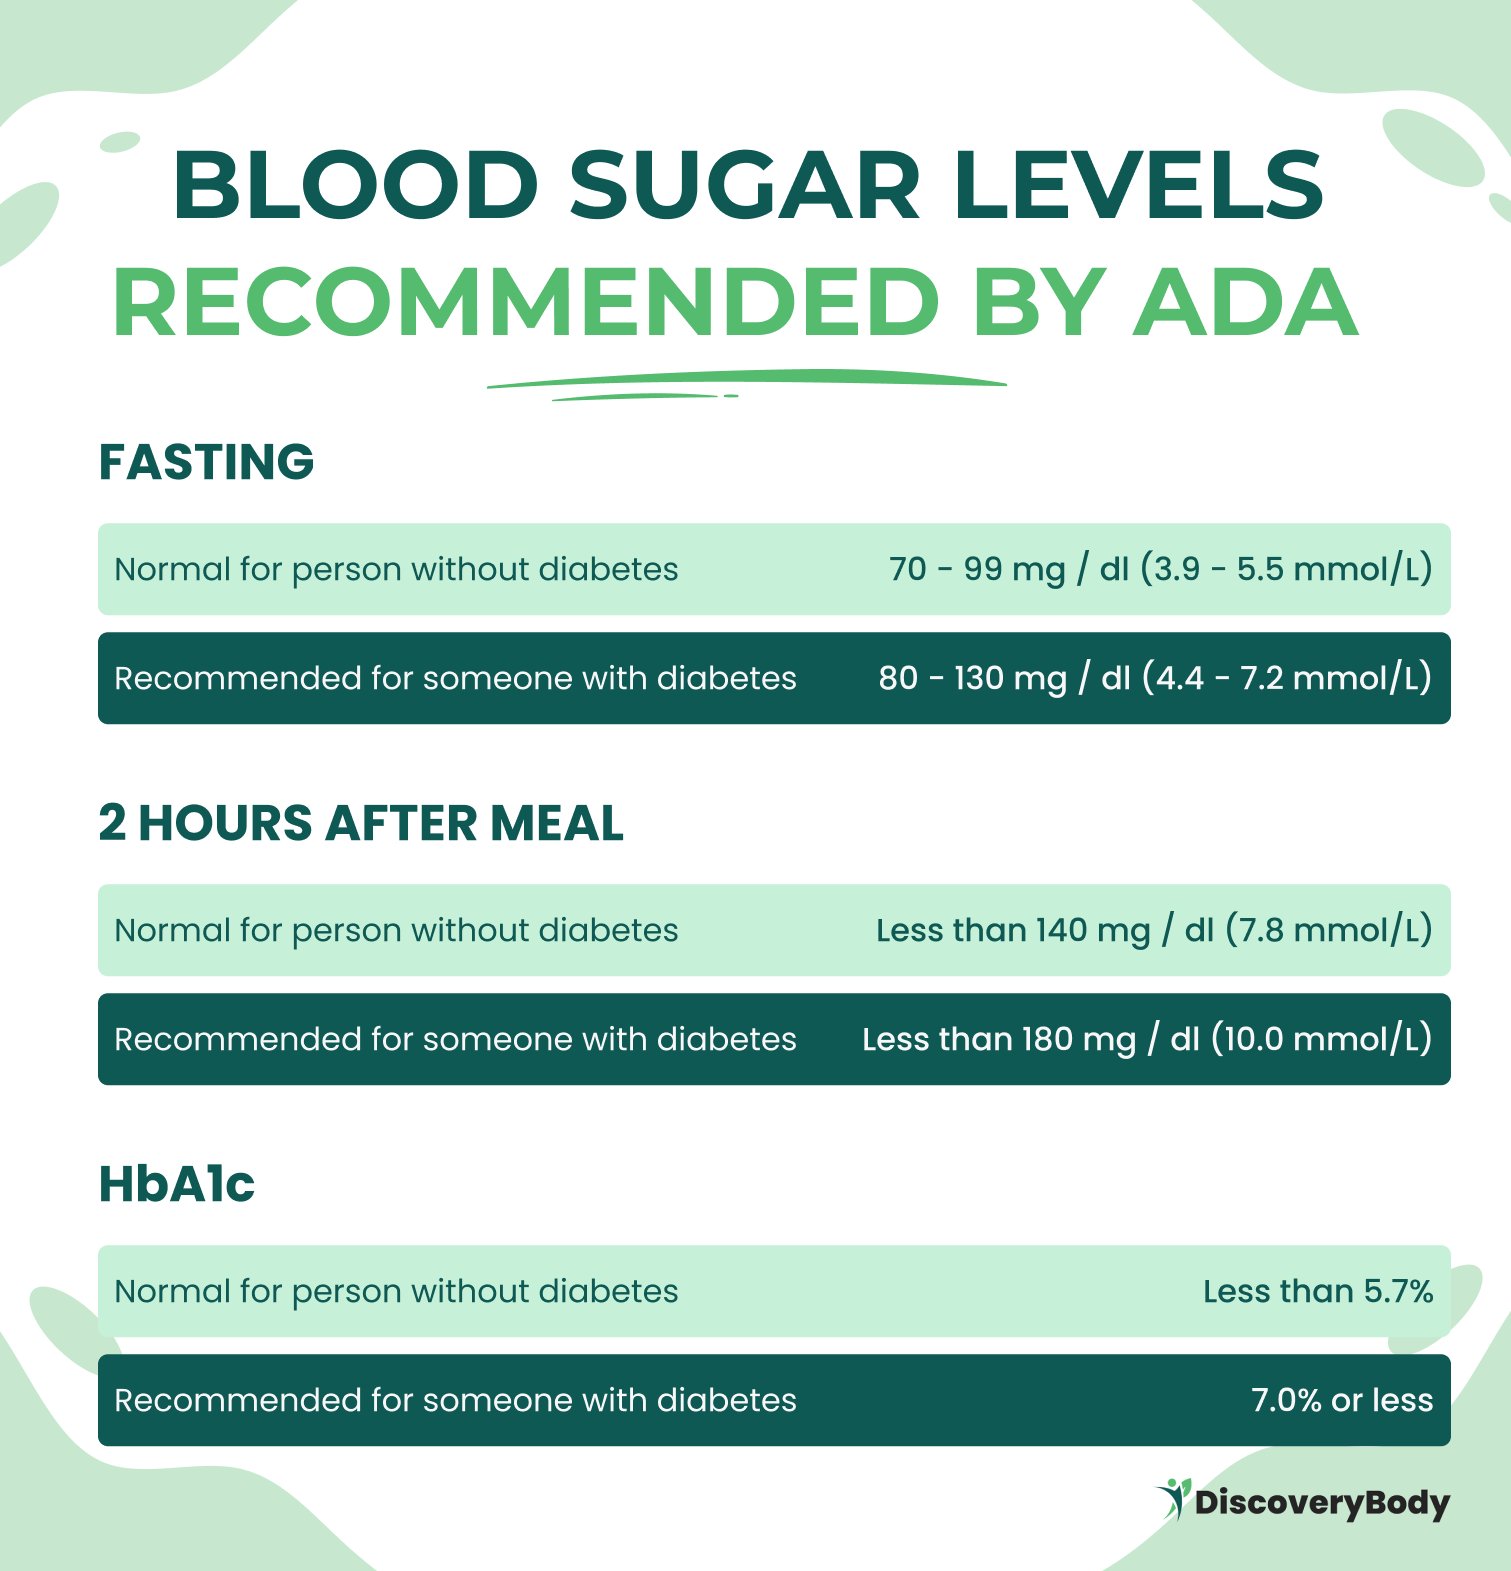 Regular blood sugar monitoring is important for individuals with type 2 diabetes